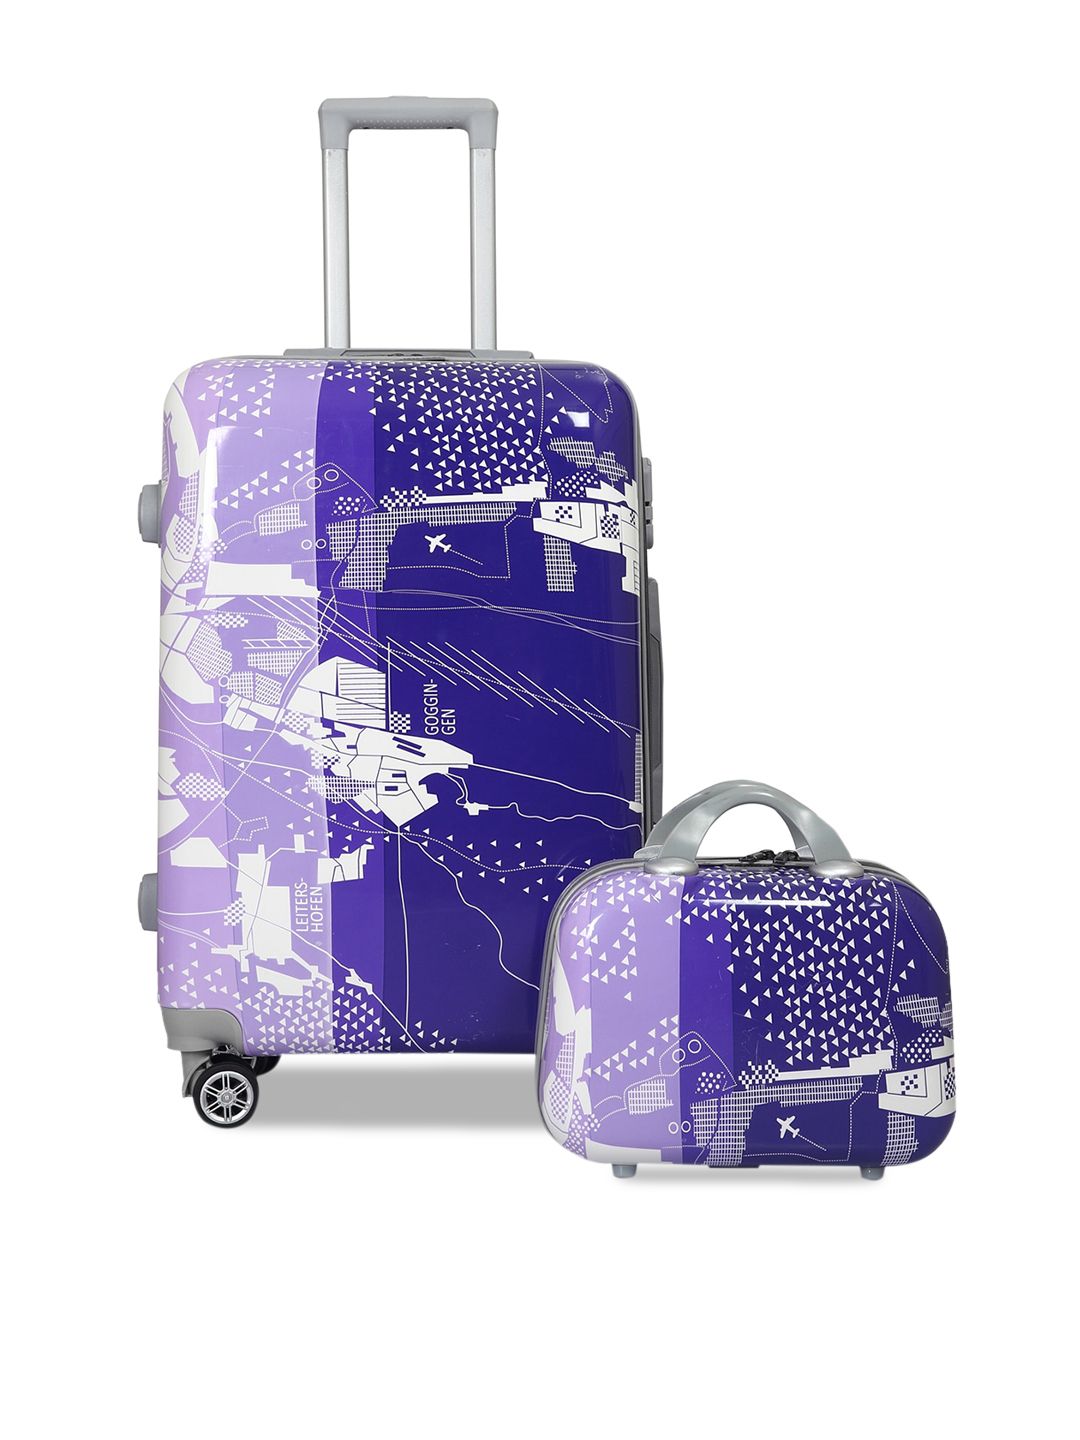 Polo Class Set Of 2 White & Purple Hard-Sided Trolley Suitcase & Vanity Bag Price in India